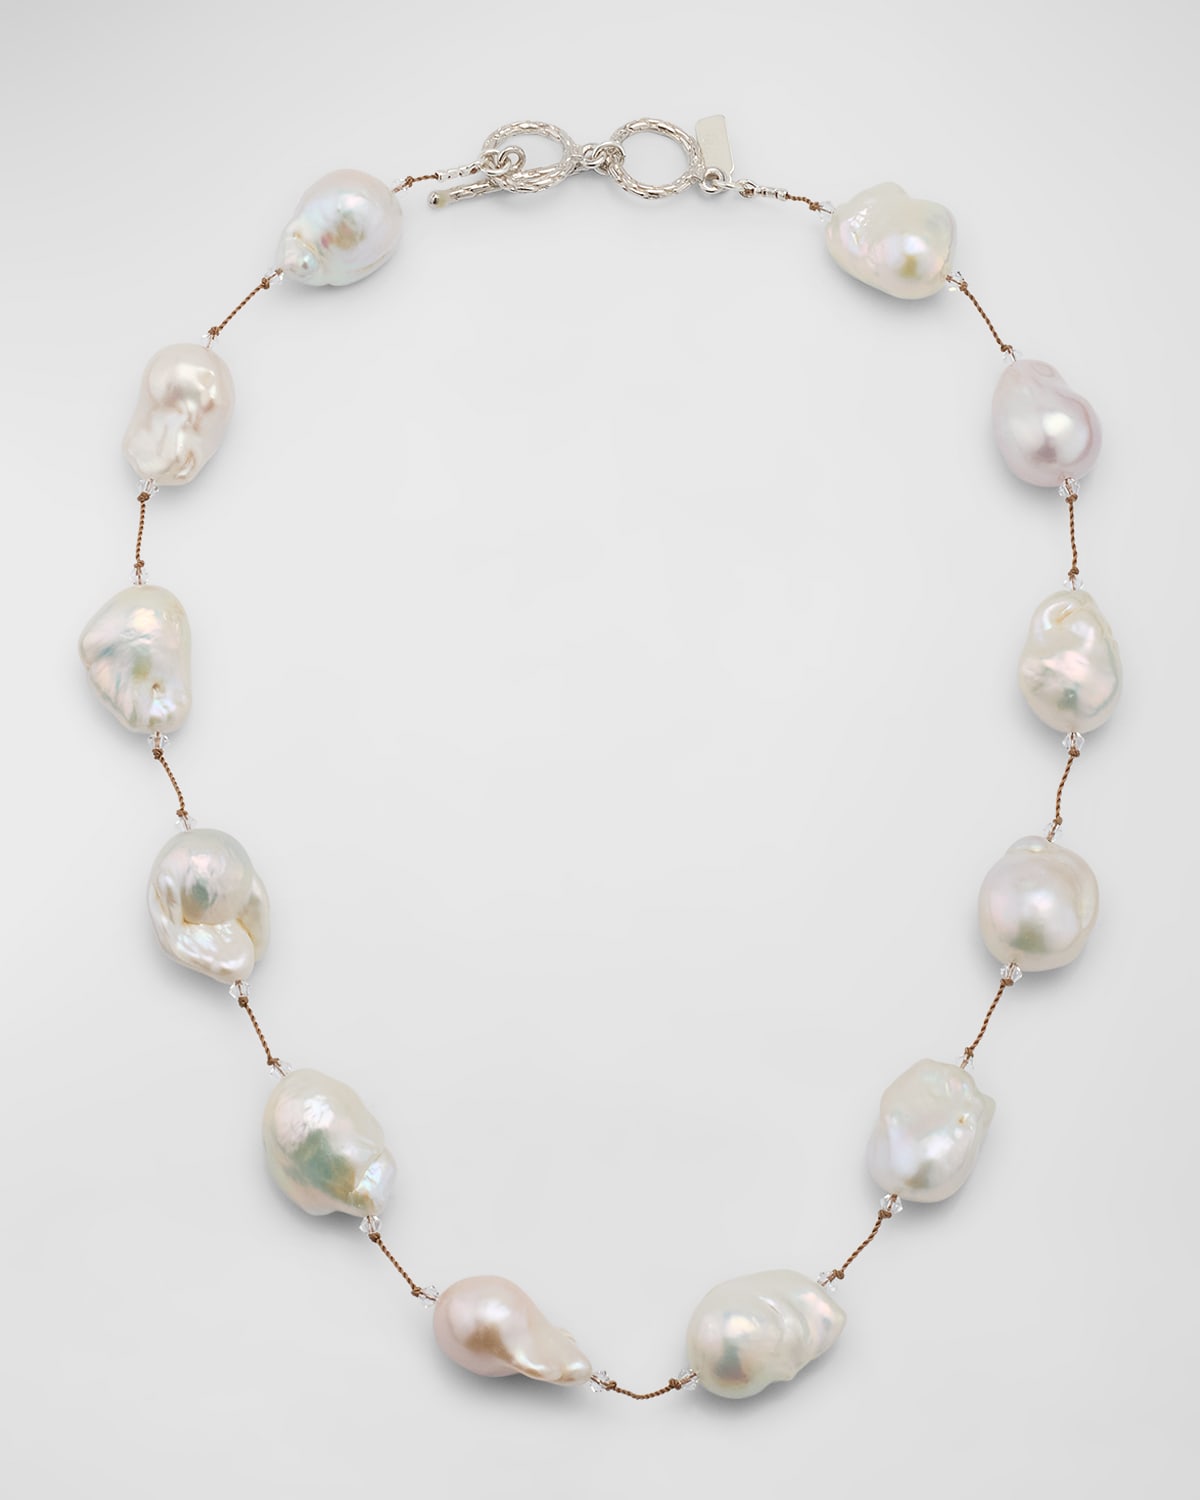 White Baroque Pearl Necklace with Sterling Silver